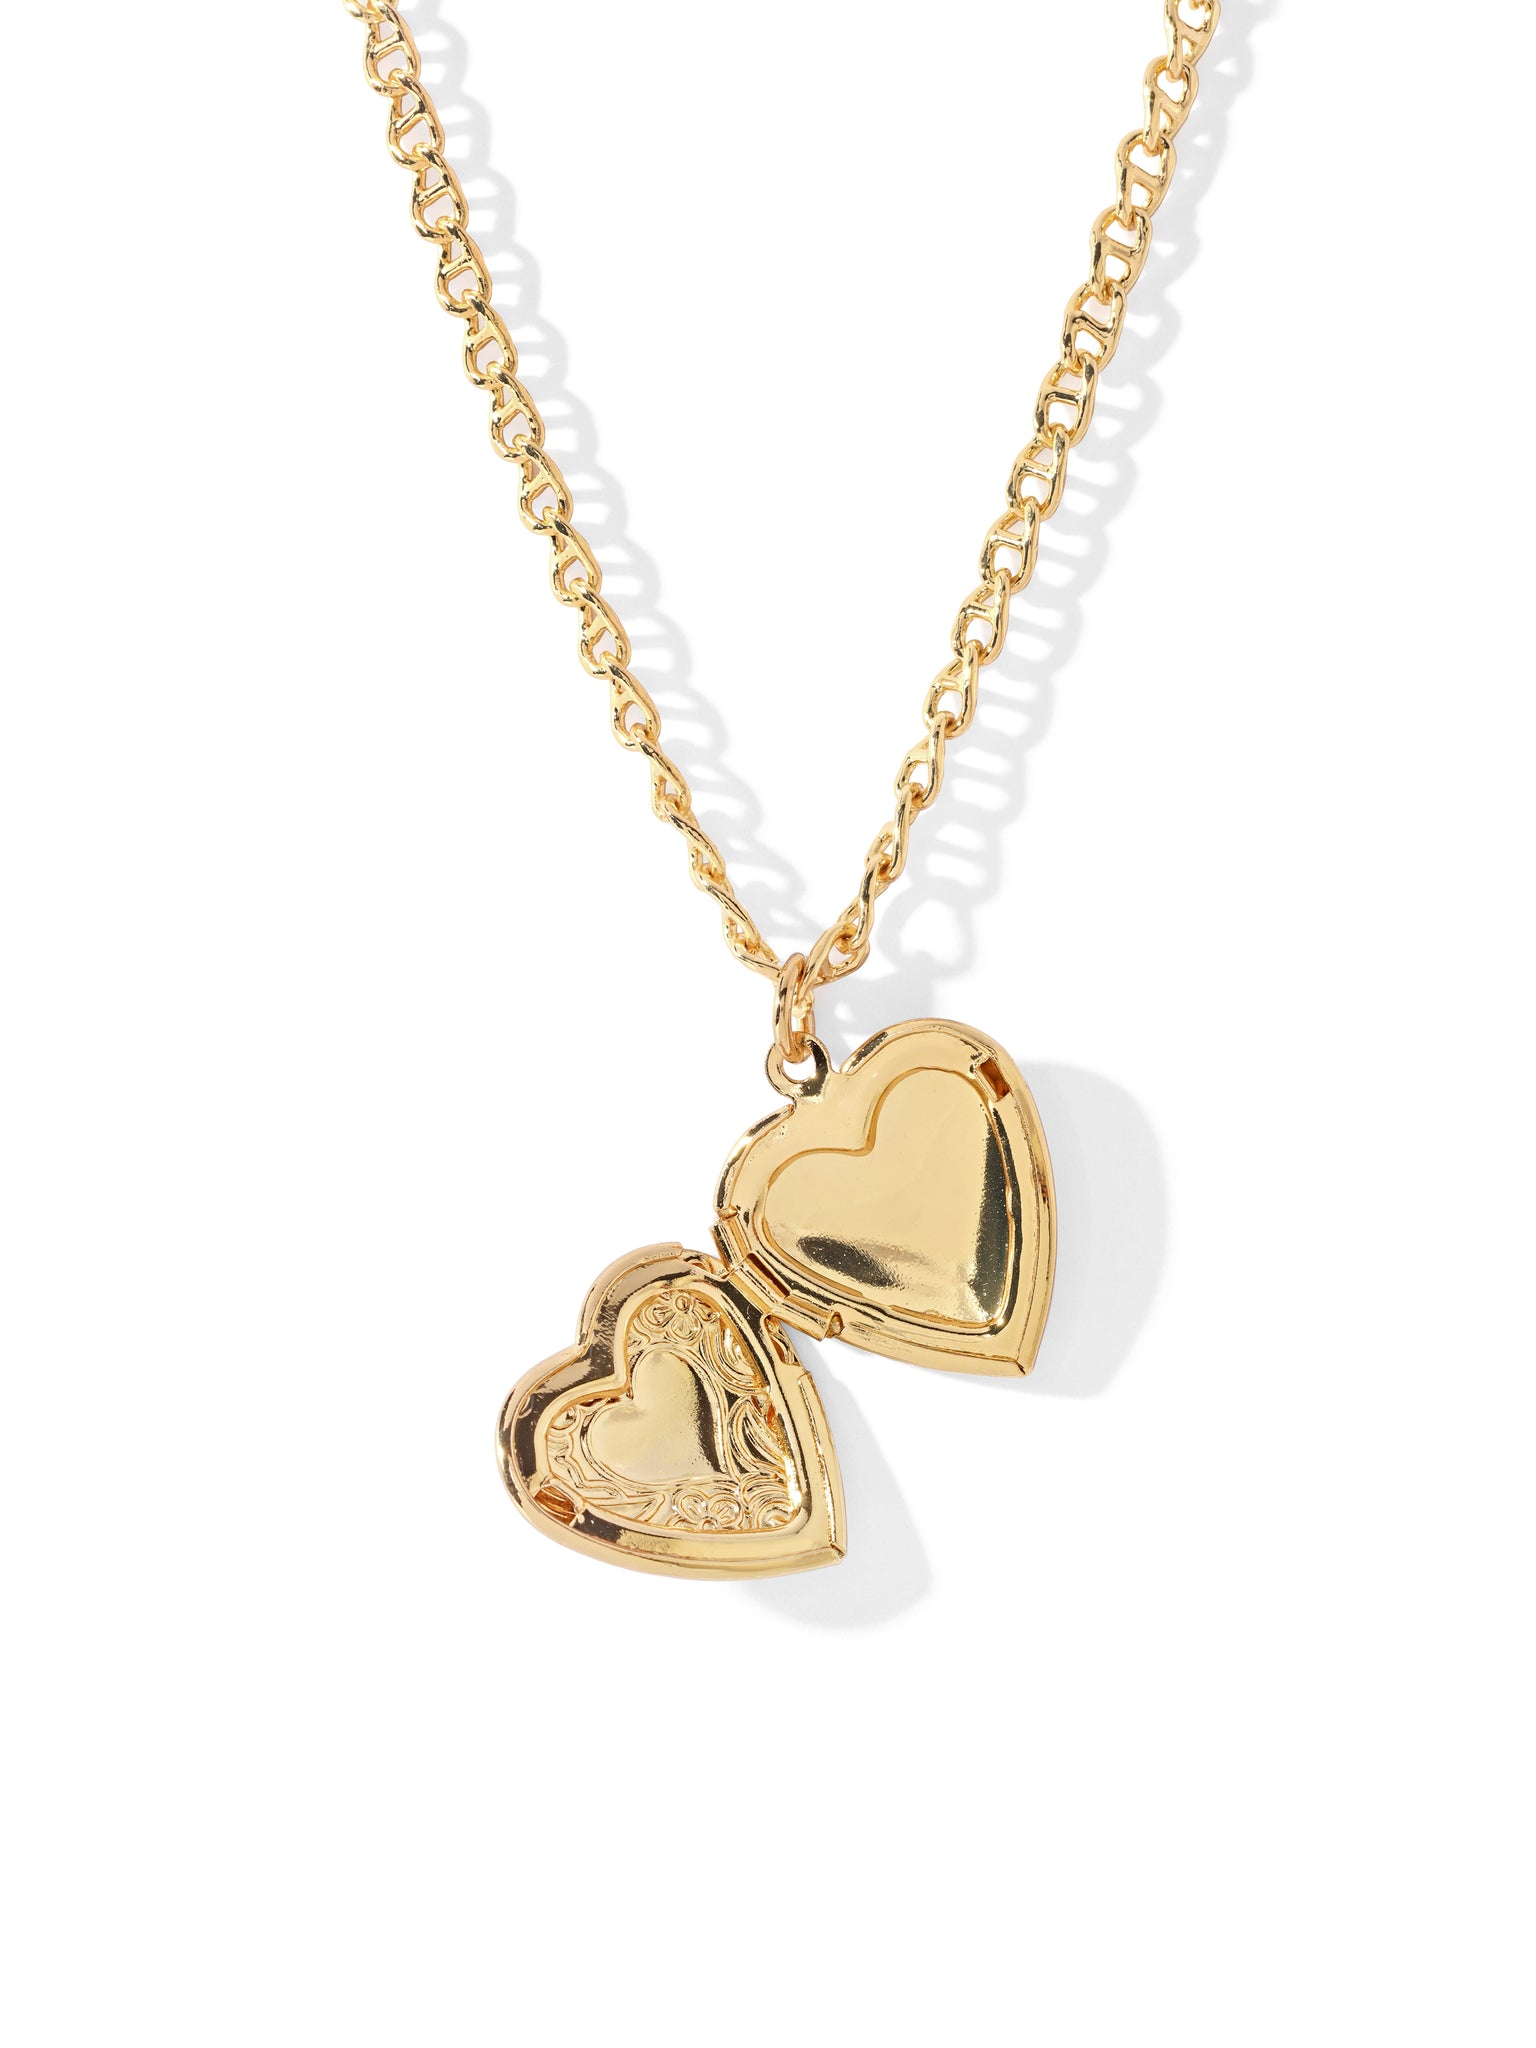 Petite Cable Heart Pendant Necklace in Sterling Silver with 14K Yellow Gold  and Rhodolite Garnet, 17.1mm | David Yurman